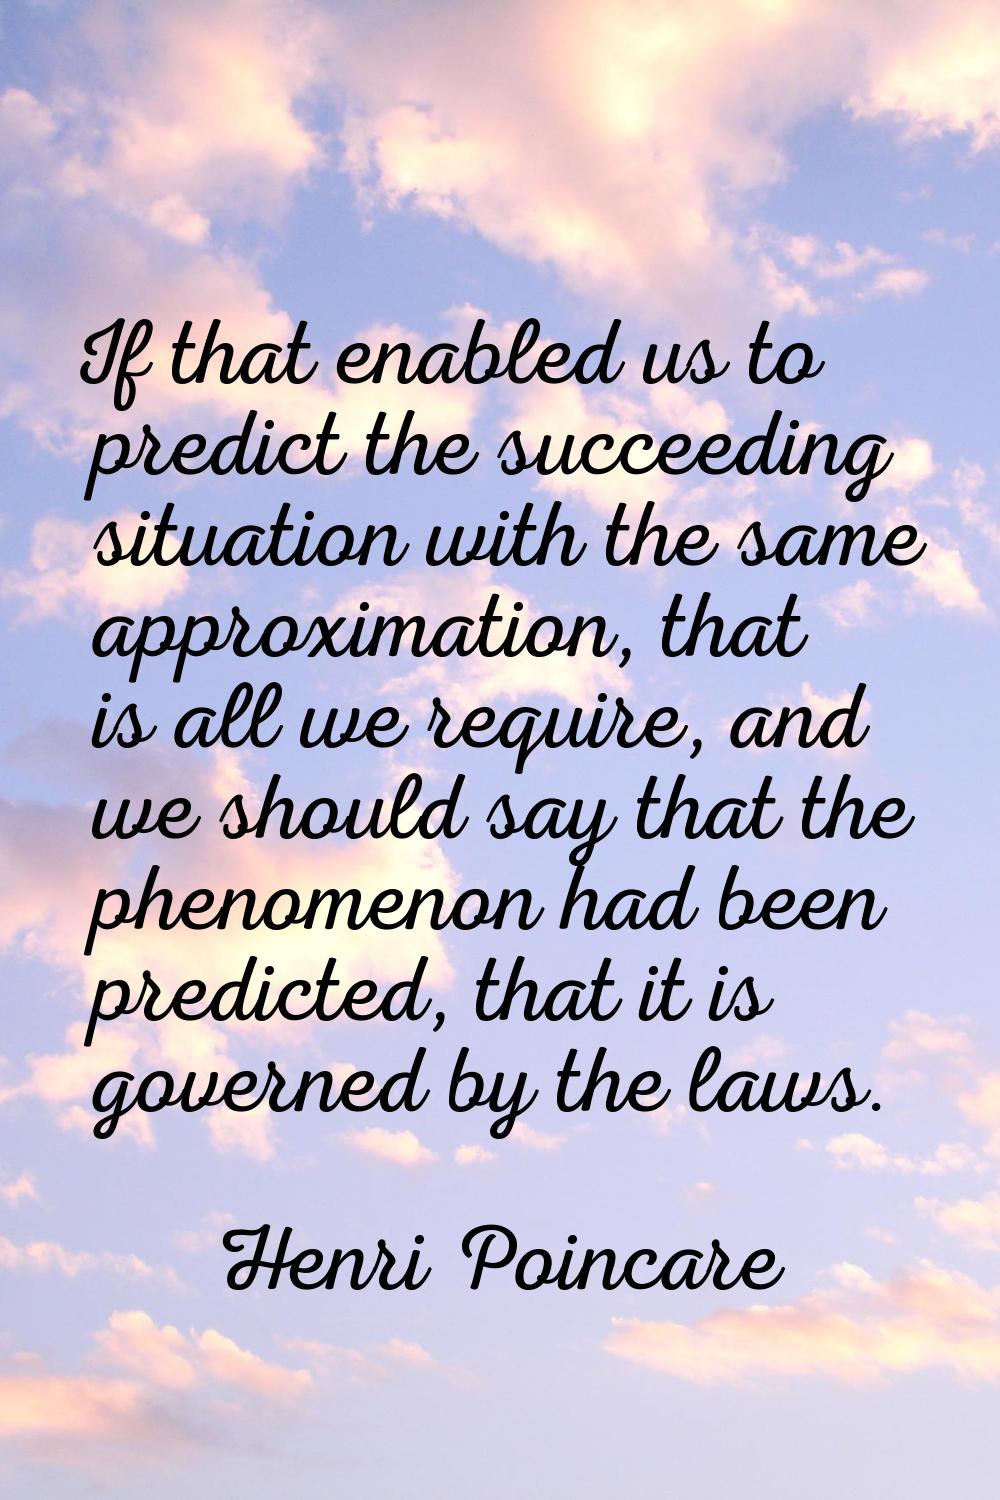 If that enabled us to predict the succeeding situation with the same approximation, that is all we 